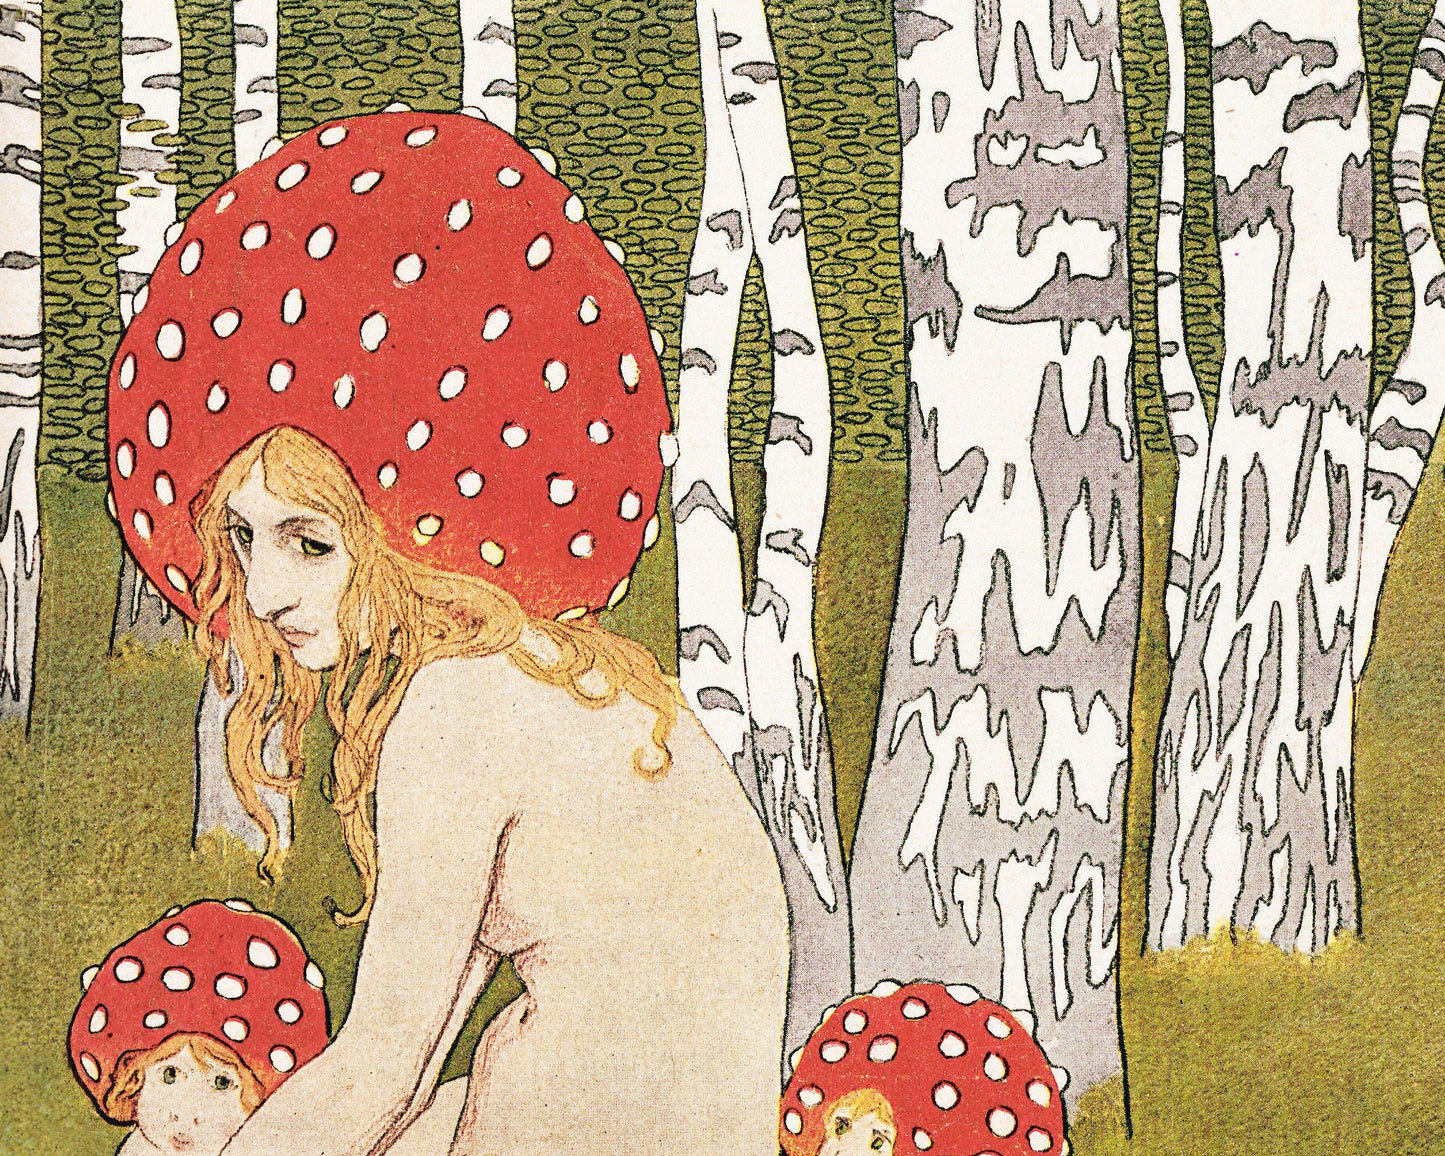 Vintage Mother Nature fine art print | Mother Mushroom and her children | Antique woodland wall art | Fairytale painting | Magical forest